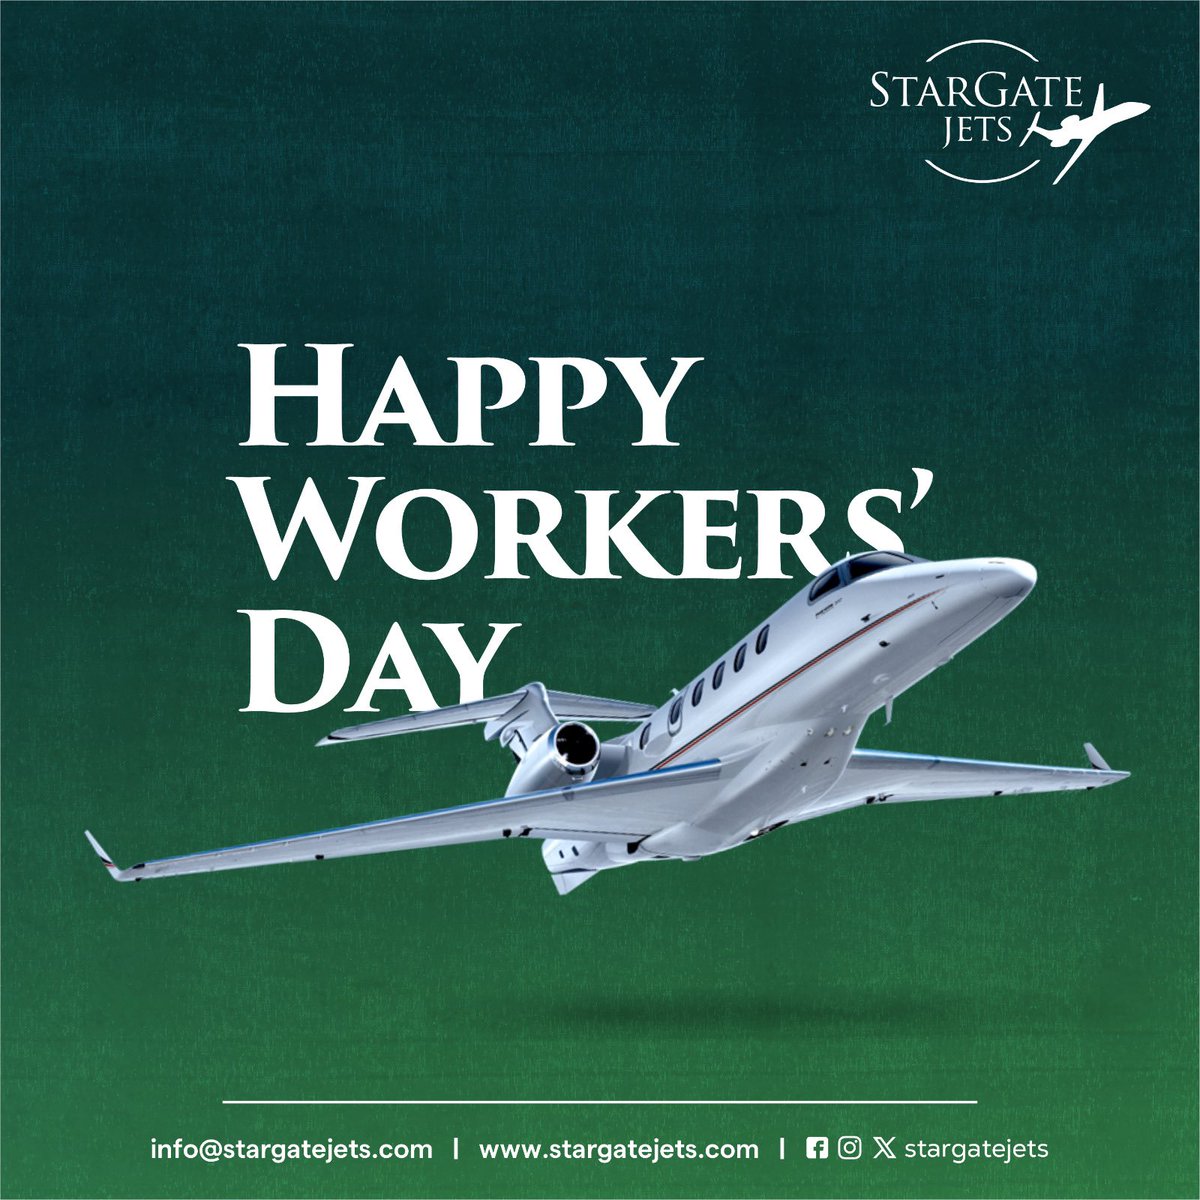 Redefining the skies with every flight, our team of dedicated professionals ensures luxury meets excellence with every journey. 
Today, we celebrate their commitment to impeccable service and unparalleled experiences. 
Happy Workers’ Day! 🛩️

#privatejetcharter #luxurytravel 🇳🇬